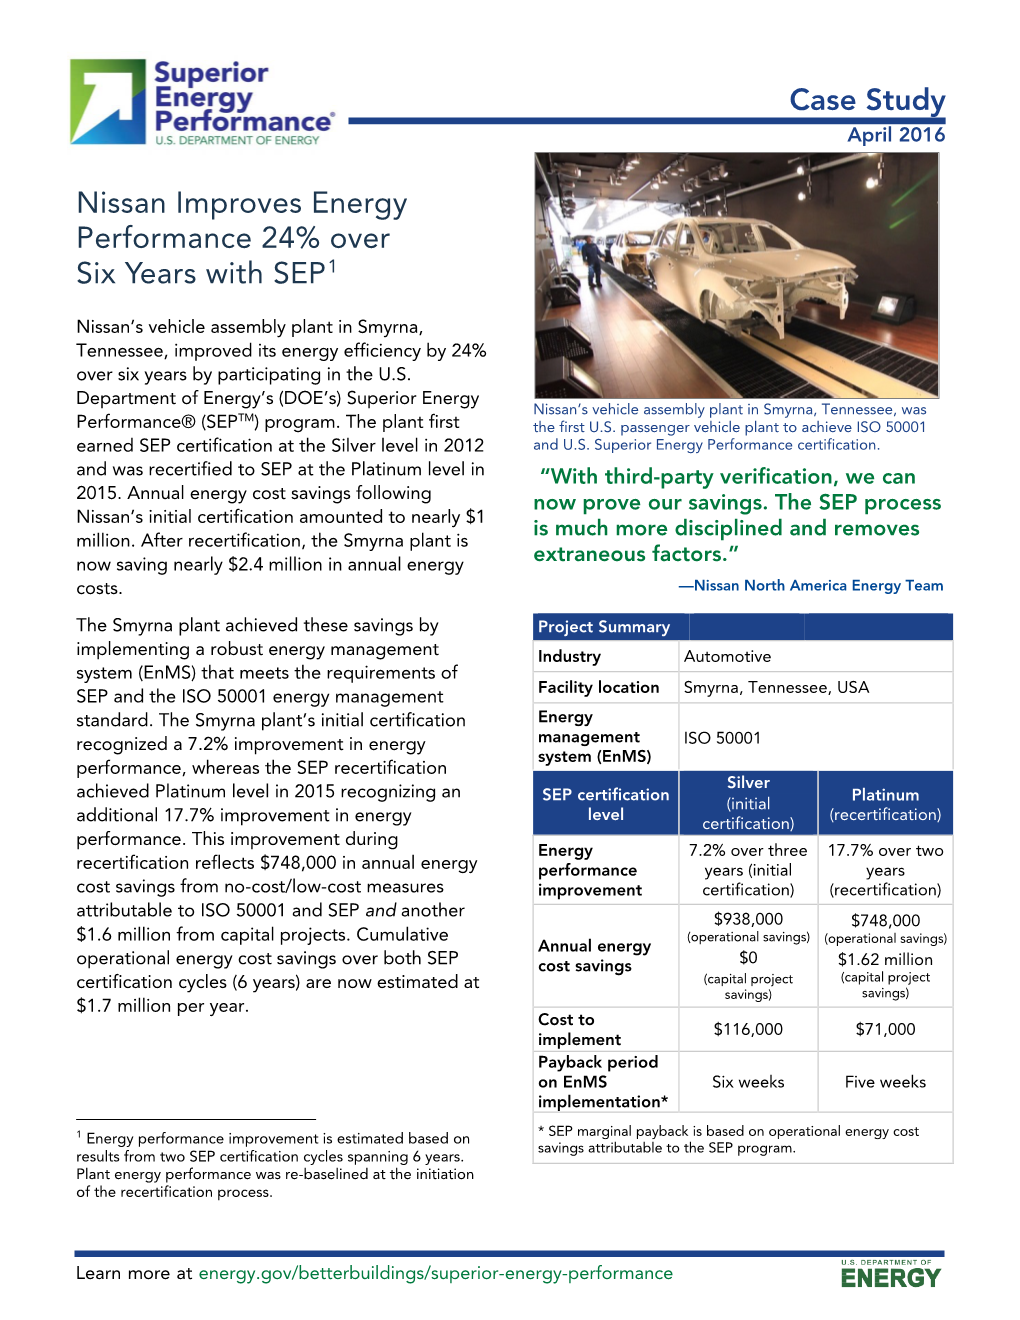 Nissan Improves Energy Performance 24% Over Six Years with SEP1